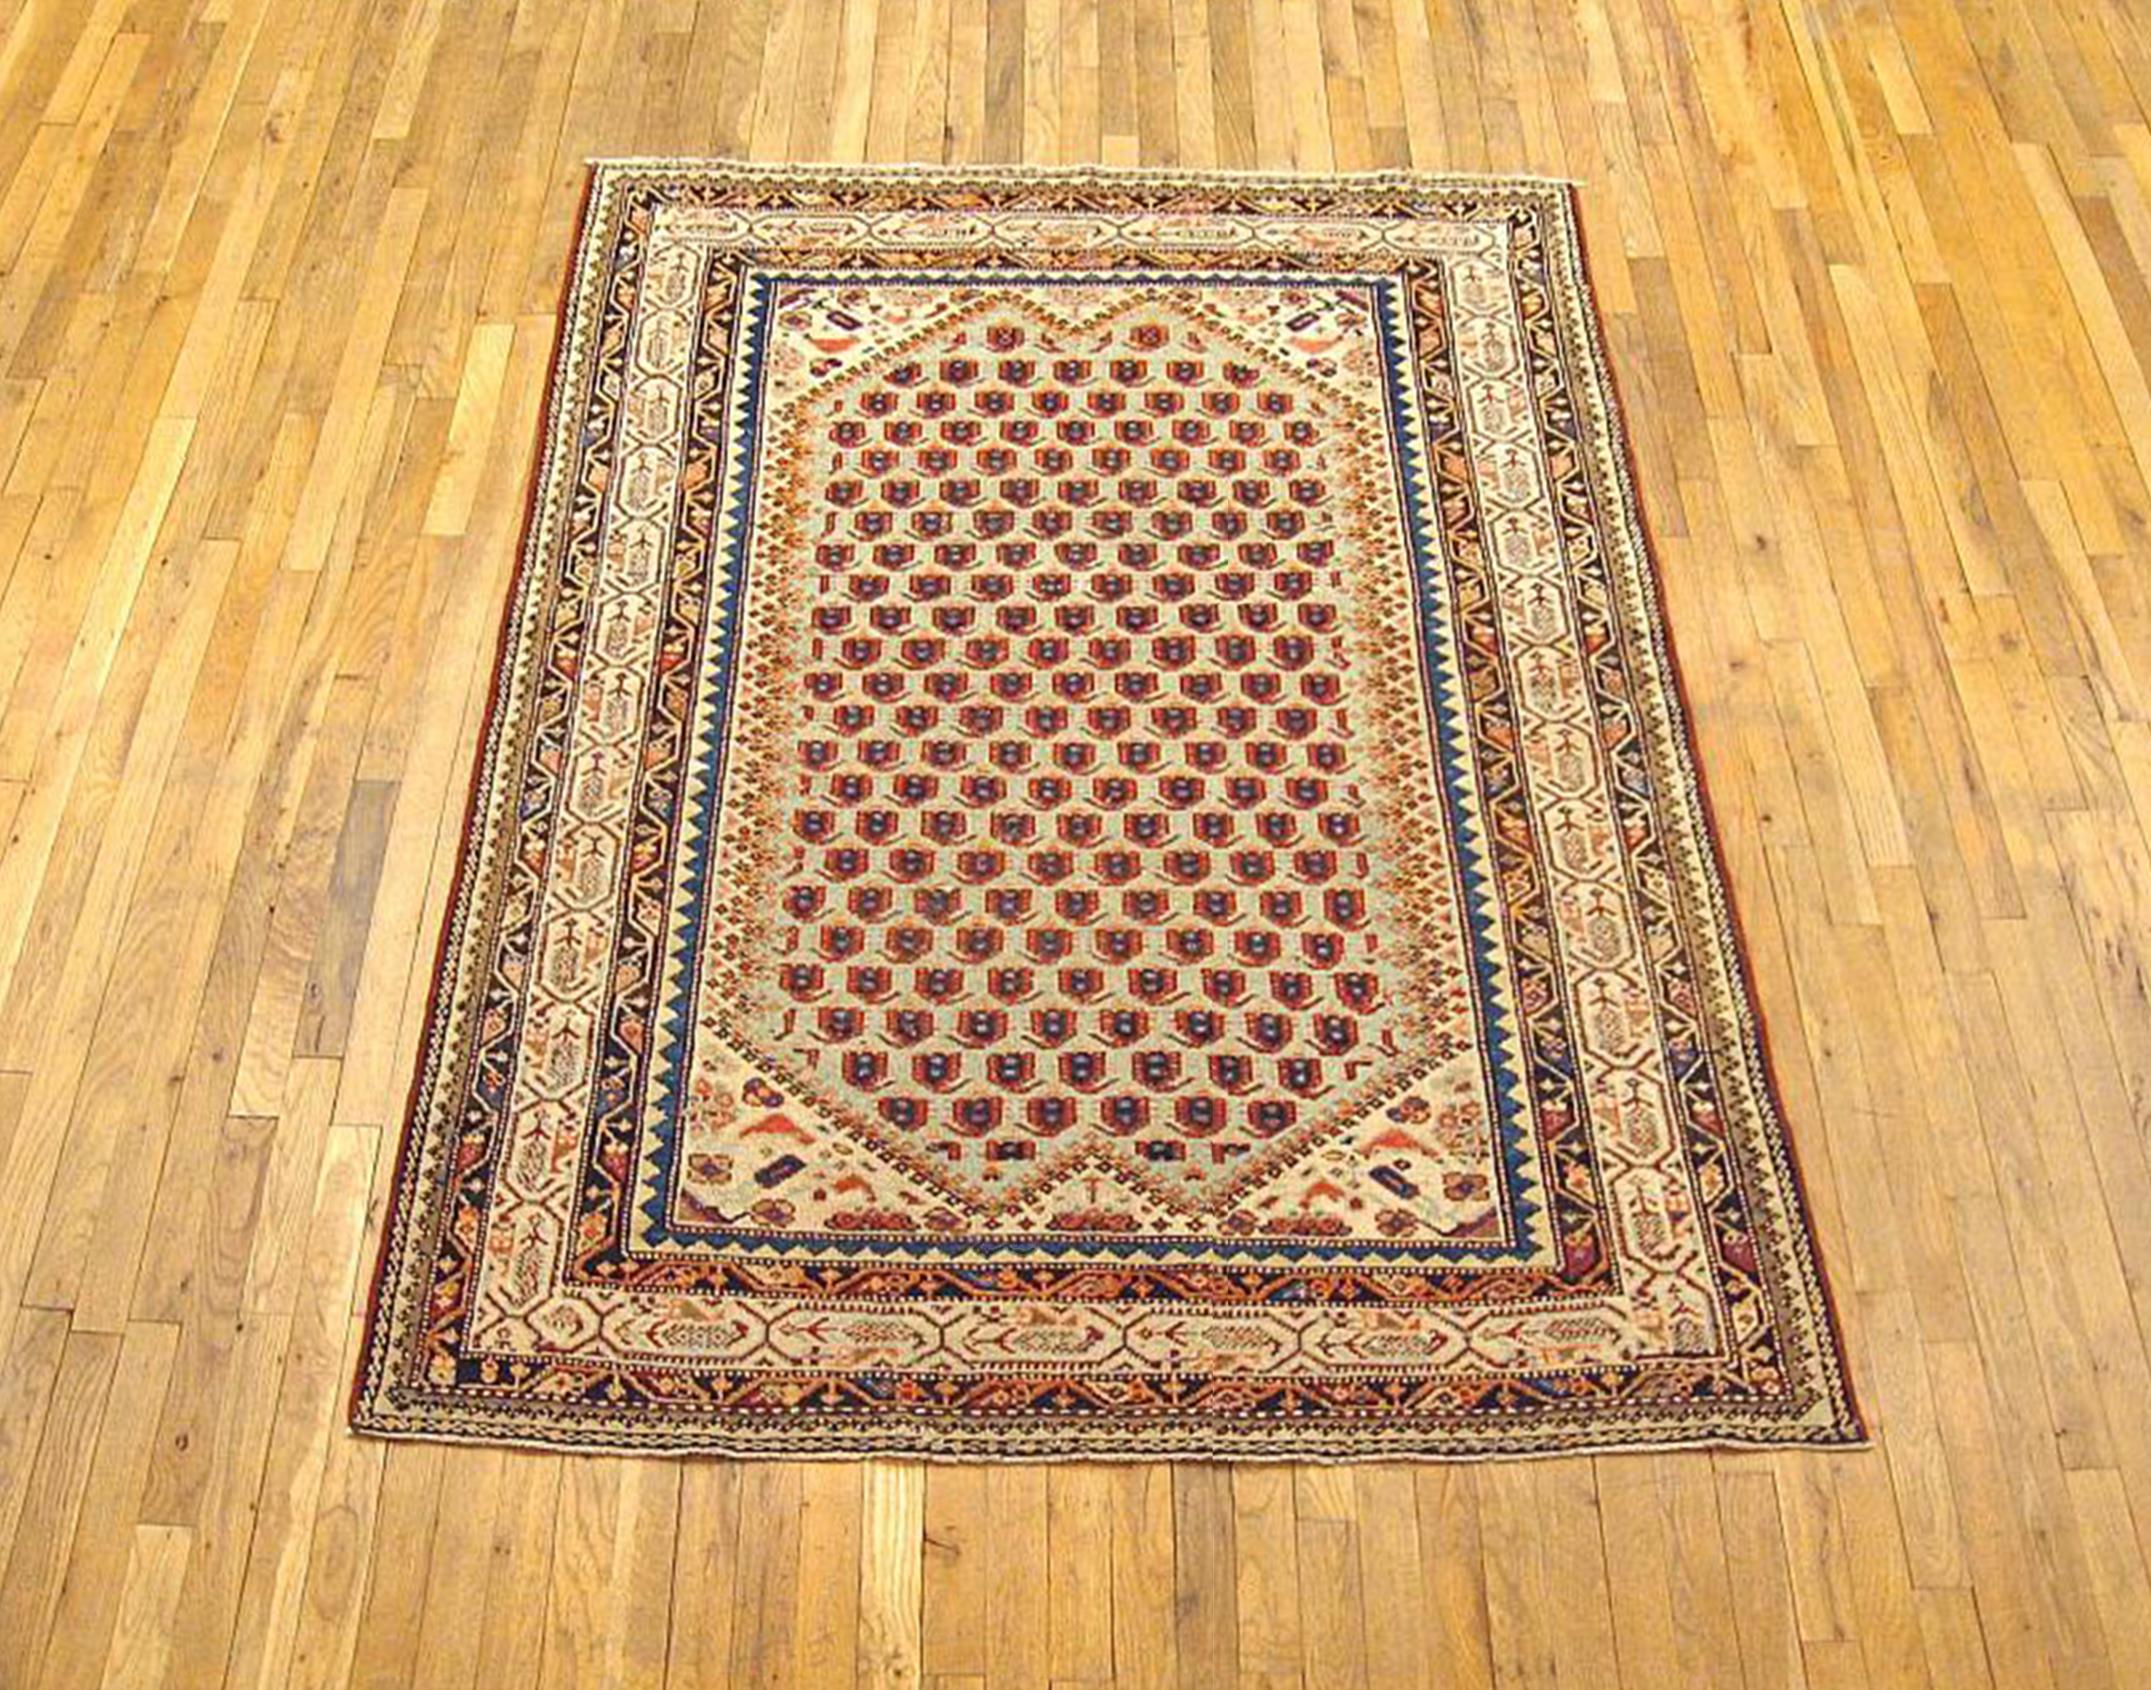 Antique Persian Malayer Oriental Rug in Small Size

An antique Persian Malayer oriental rug, circa 1920. Size 6'4